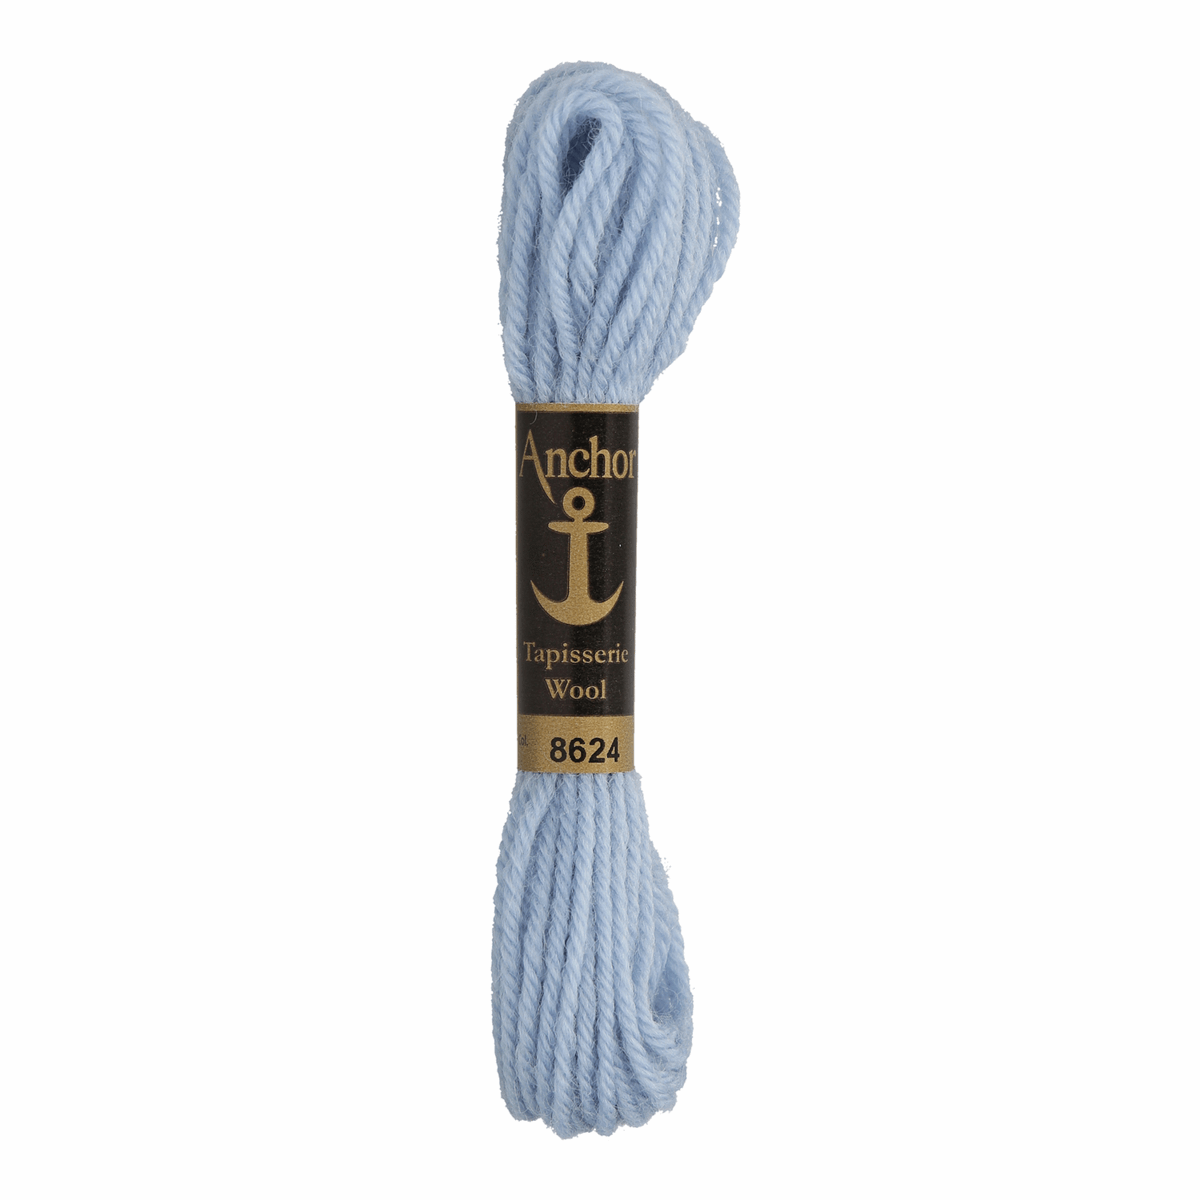 Anchor Tapestry Wool - Shade 8624 - 10m